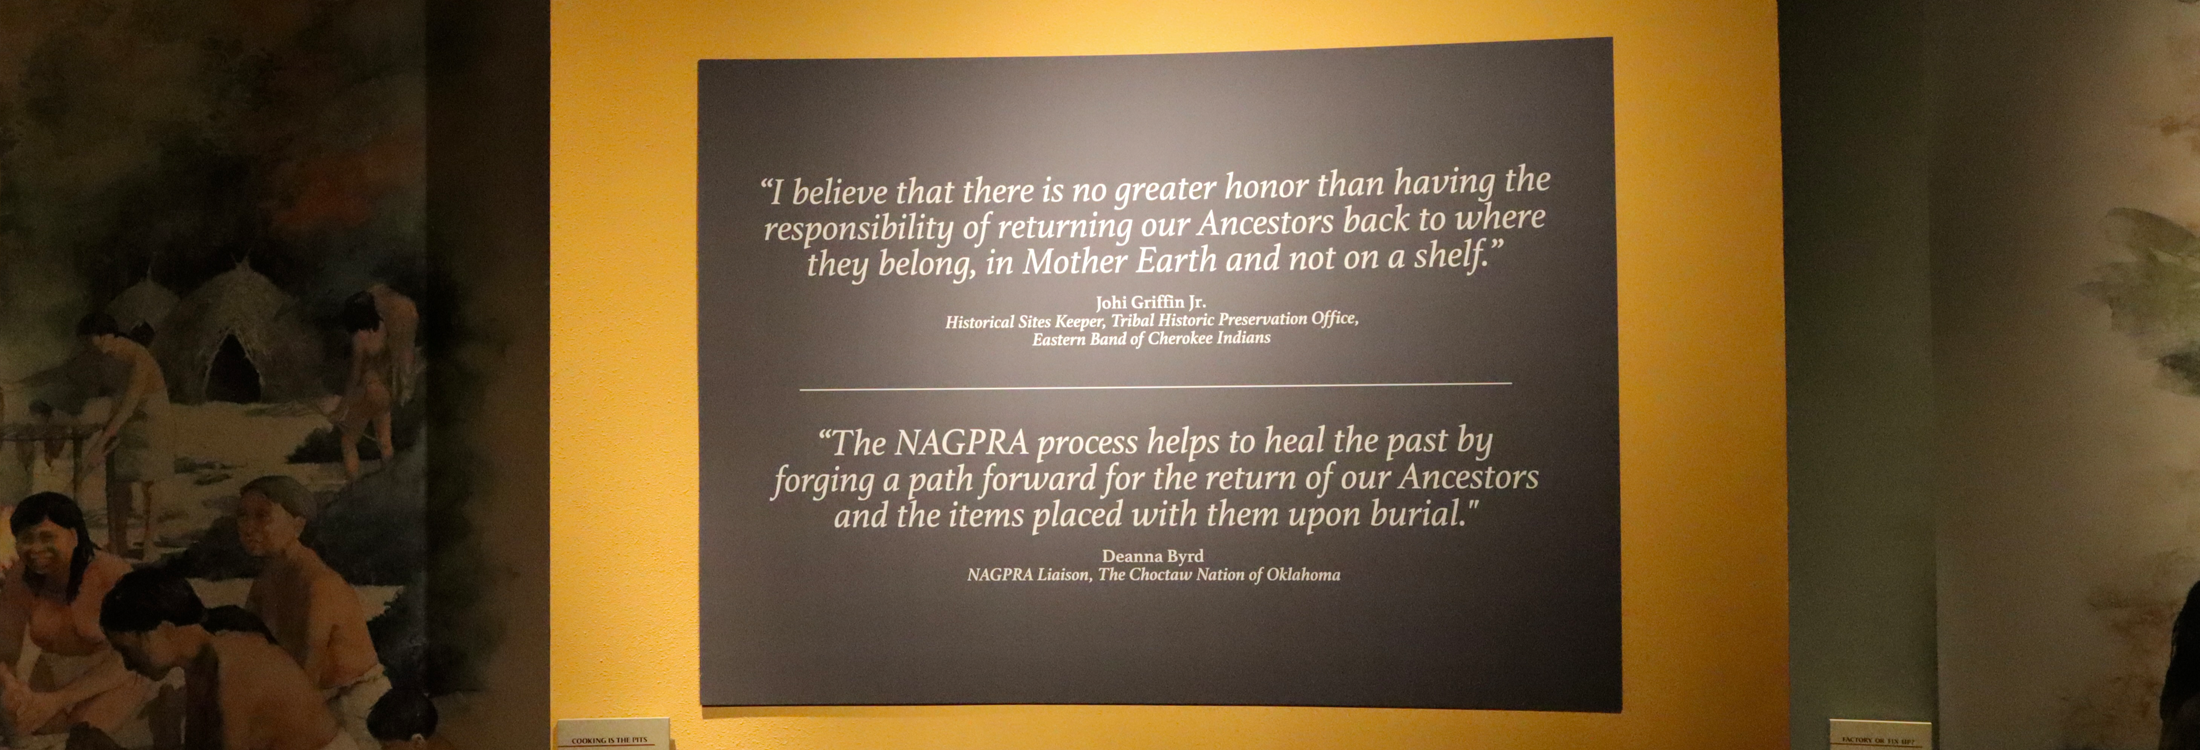 Quotes from Native Nation partners from the Eastern Band of Cherokee Indians and the Choctaw Nation of Oklahoma